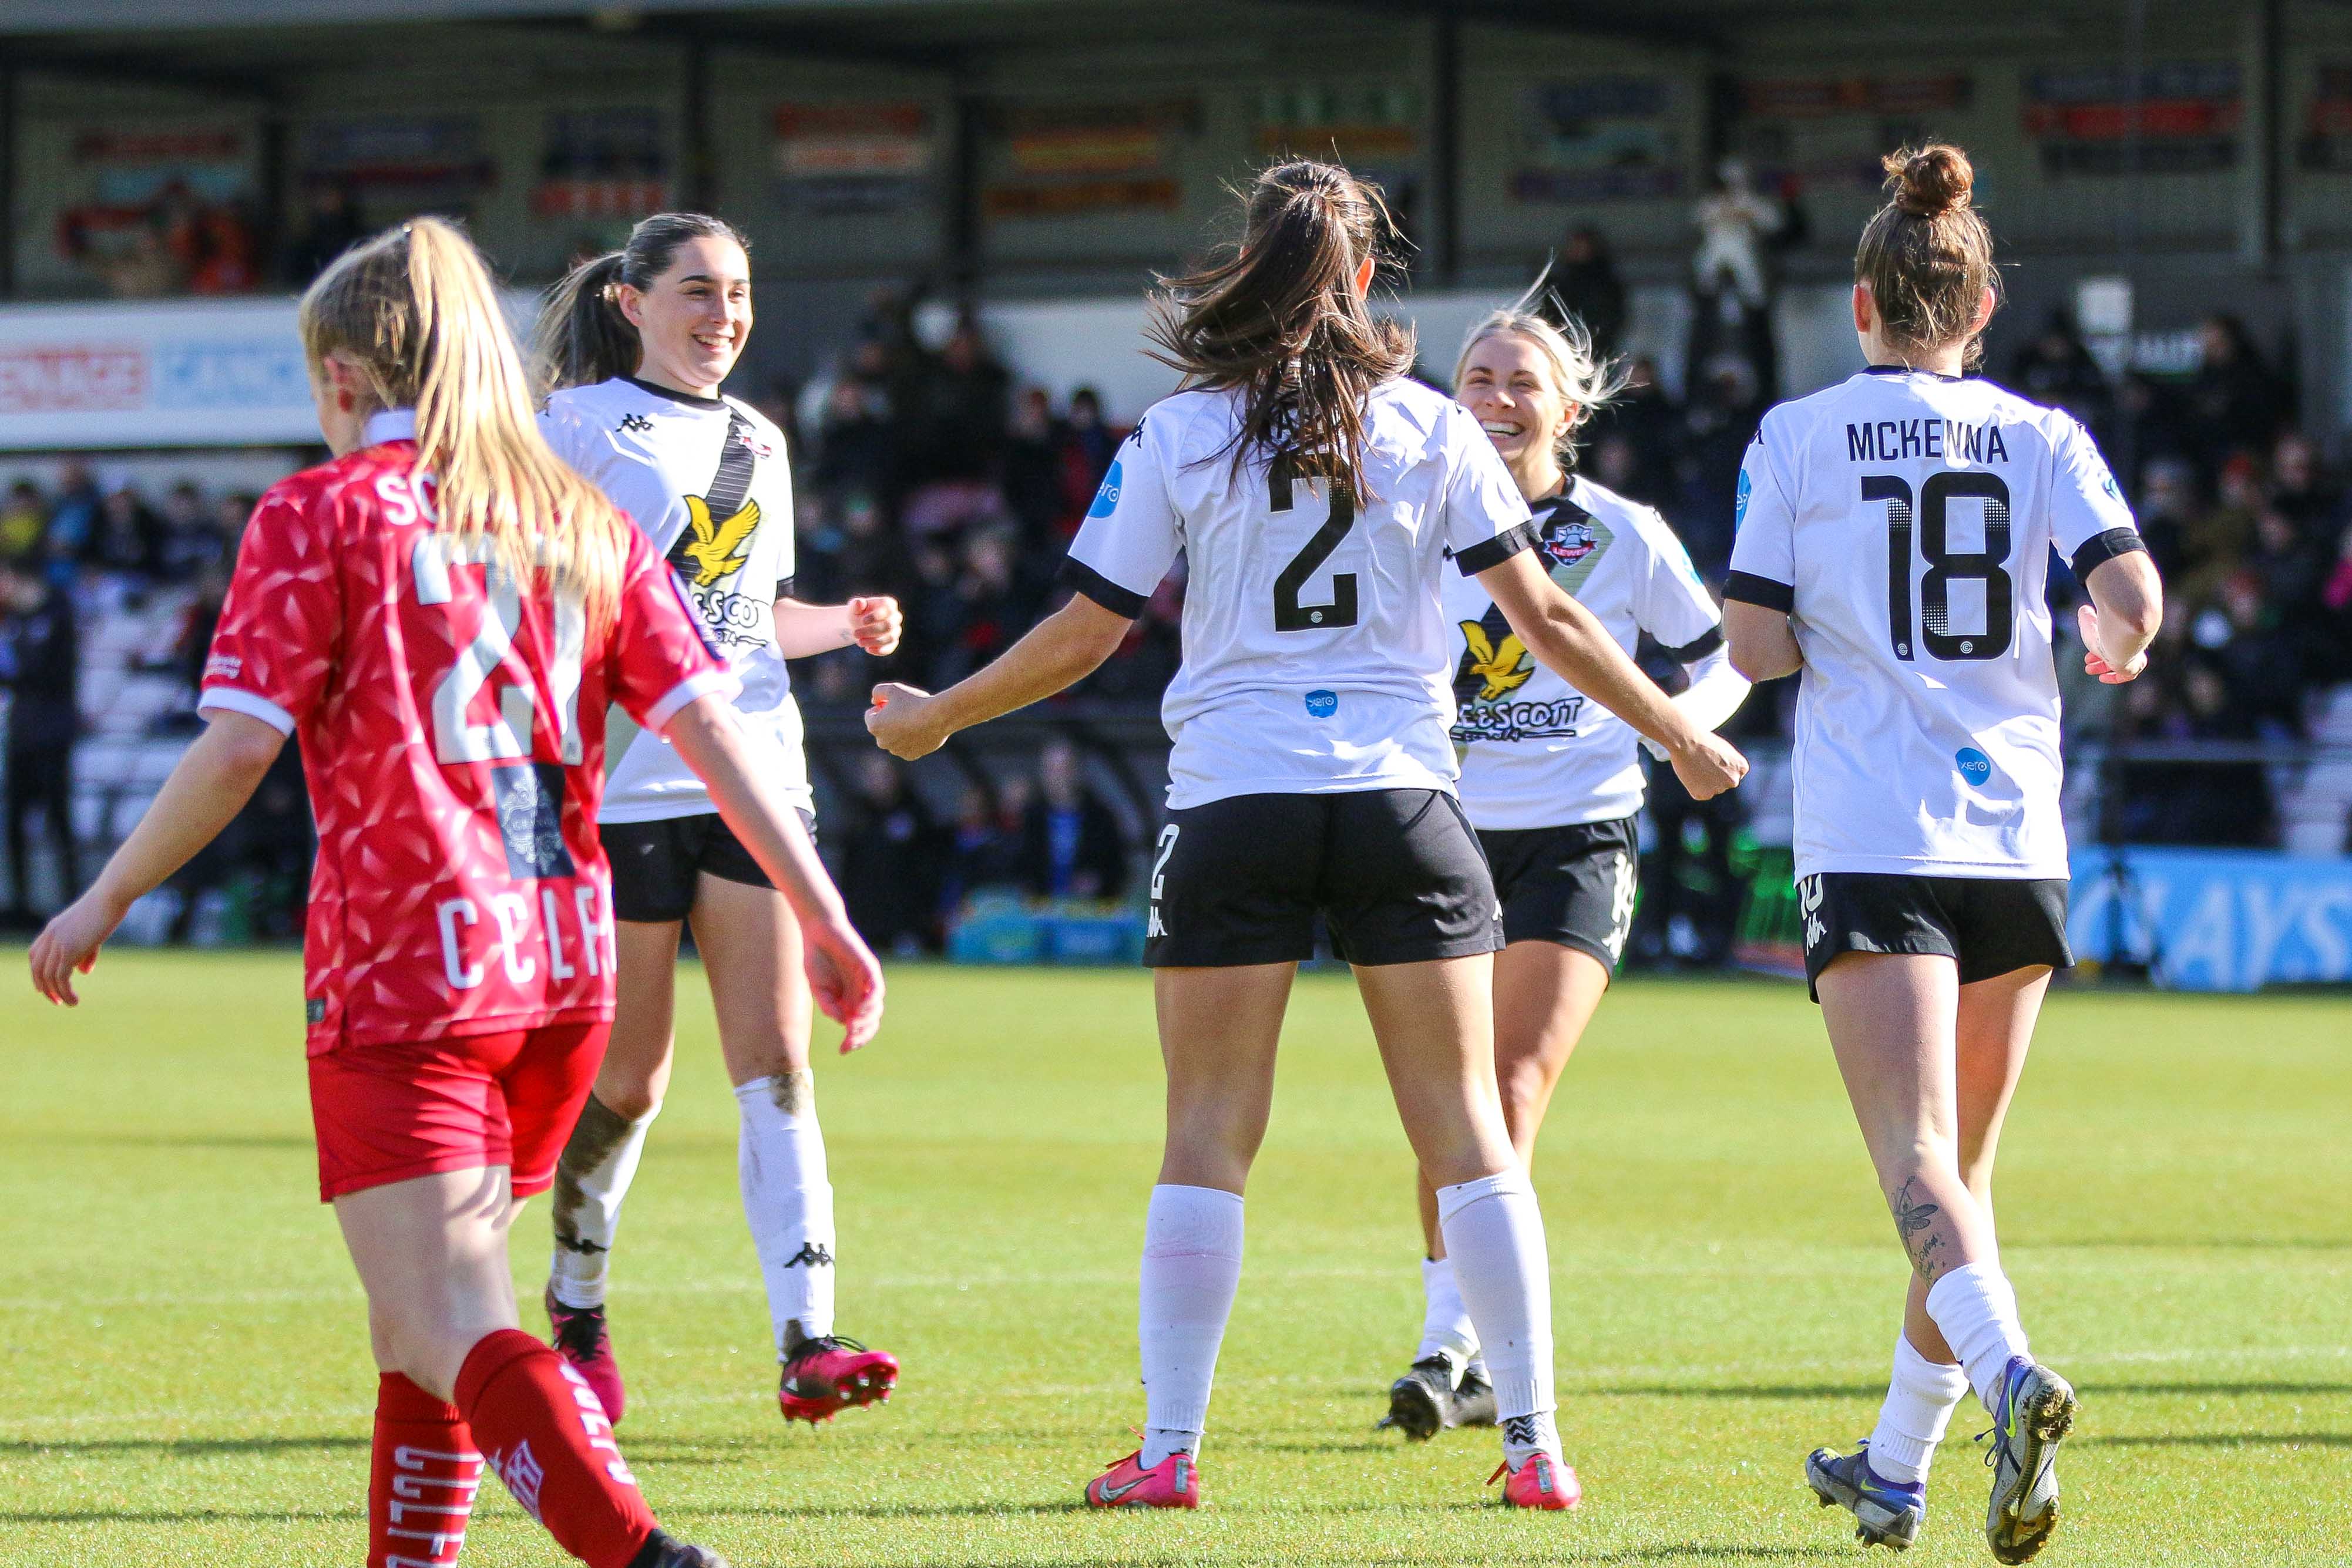 Lewes Host Man Utd In Quarter-Finals Of 2022-23 Women’s FA Cup